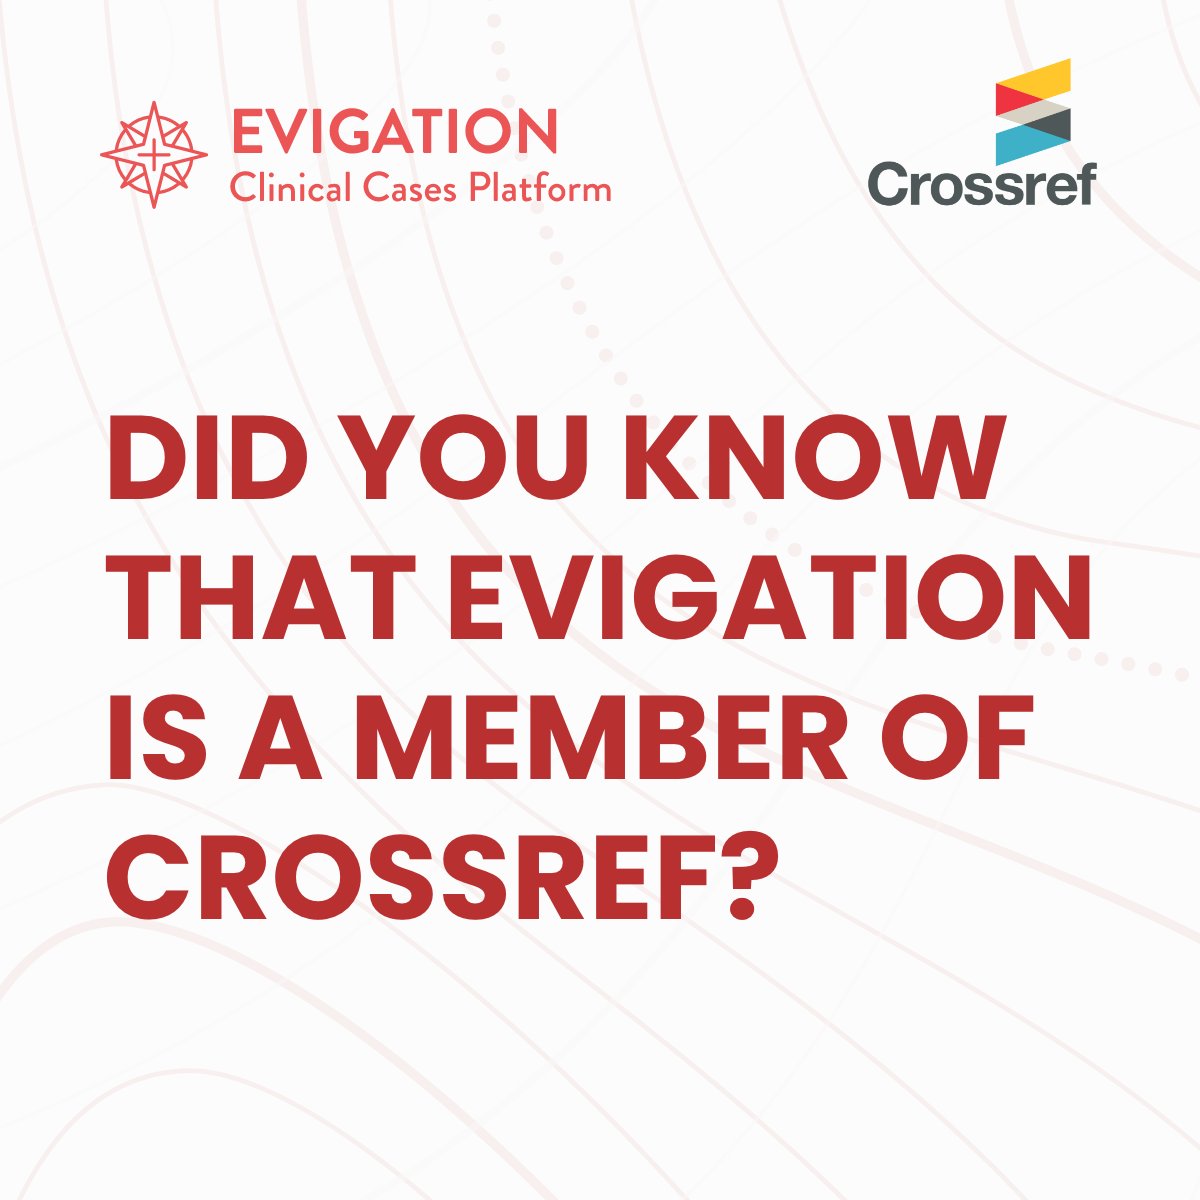 🧭#EVIGATION is a member of #Crossref, which means that, when you publish on our platform, your #clinicalcase will enter a universe of more than 130 million research objects from 140 around the world.